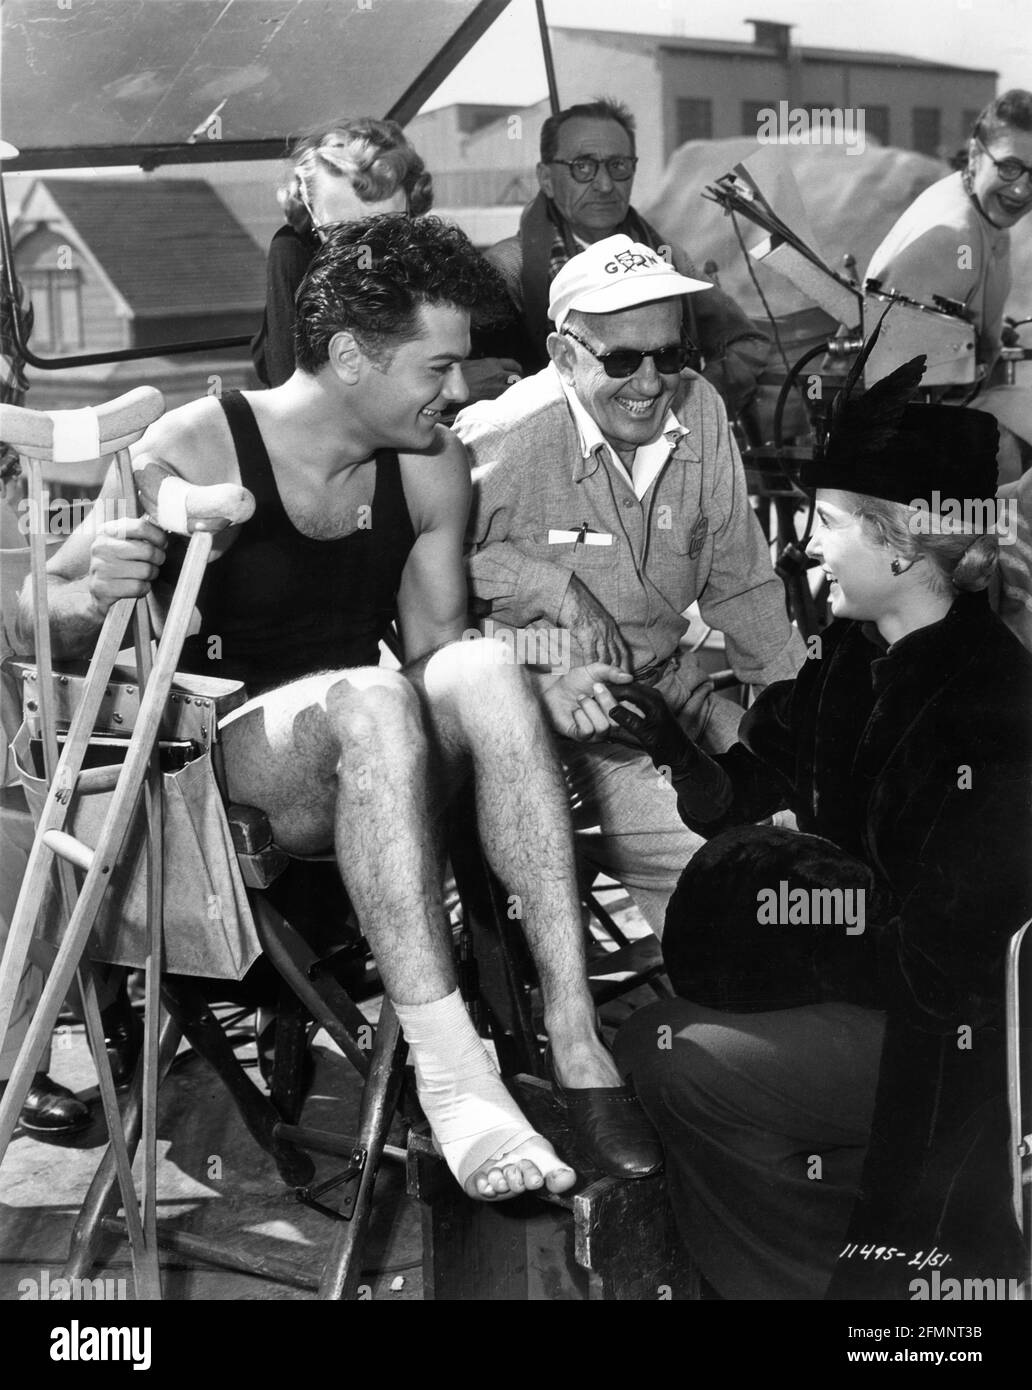 TONY CURTIS in costume as Harry Houdini (with sprained ankle) and his wife and co-star JANET LEIGH on set candid with Director GEORGE MARSHALL and Movie Crew during filming of HOUDINI 1953 director GEORGE MARSHALL book Harold Kellock screenplay Philip Yordan producer George Pal Paramount Pictures Stock Photo